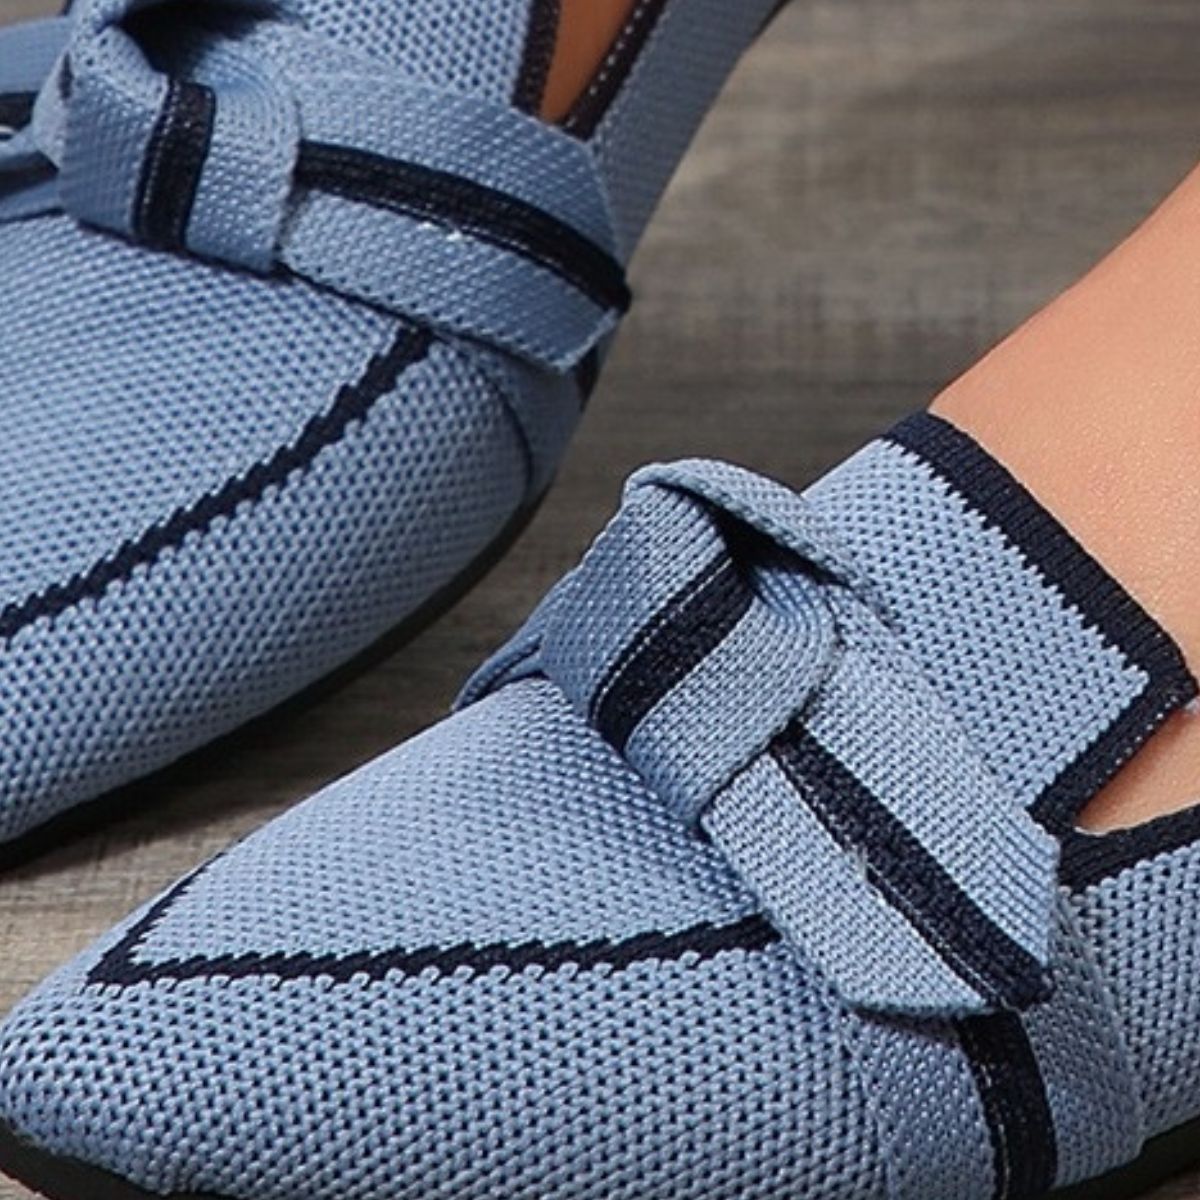 Bow Contrast Trim Point Toe Loafers - Ryzela